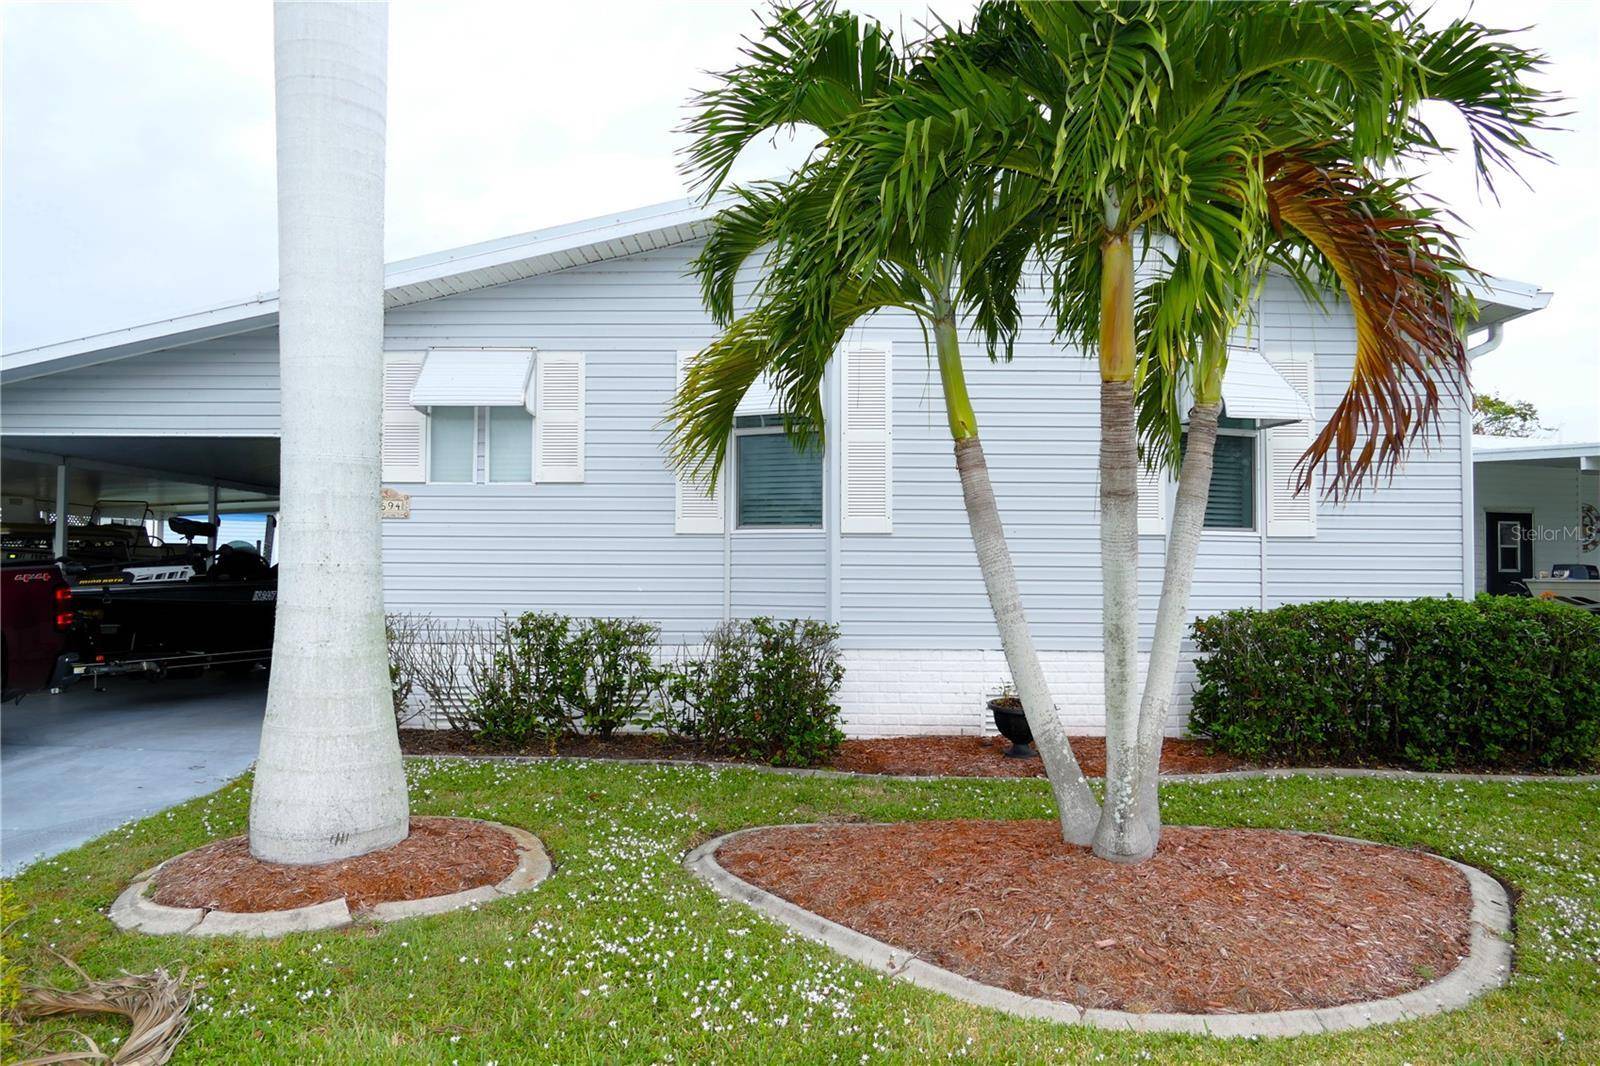 SEMINOLE COVE Active 55 Community This Charming 2 bedroom 2 bath DWMH is move in ready.